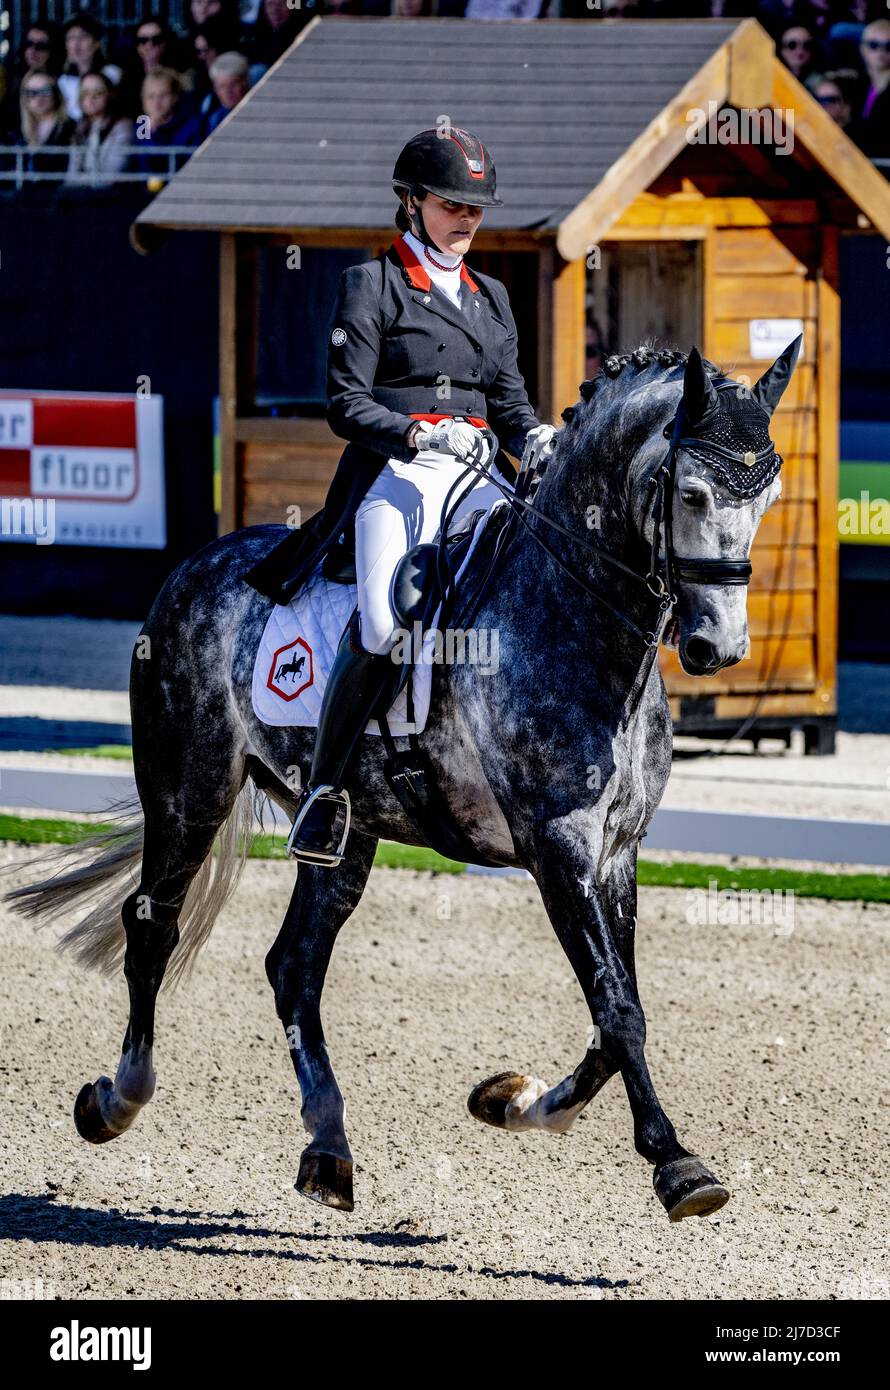 Ermelo, The Netherlands, 2022-05-08 16:27:31 ERMELO - Thamar Zweistra finished second with Hexagon's Ich Weiss during the Dutch Dressage Championship. ANP ROBIN UTRECHT netherlands out - belgium out Stock Photo